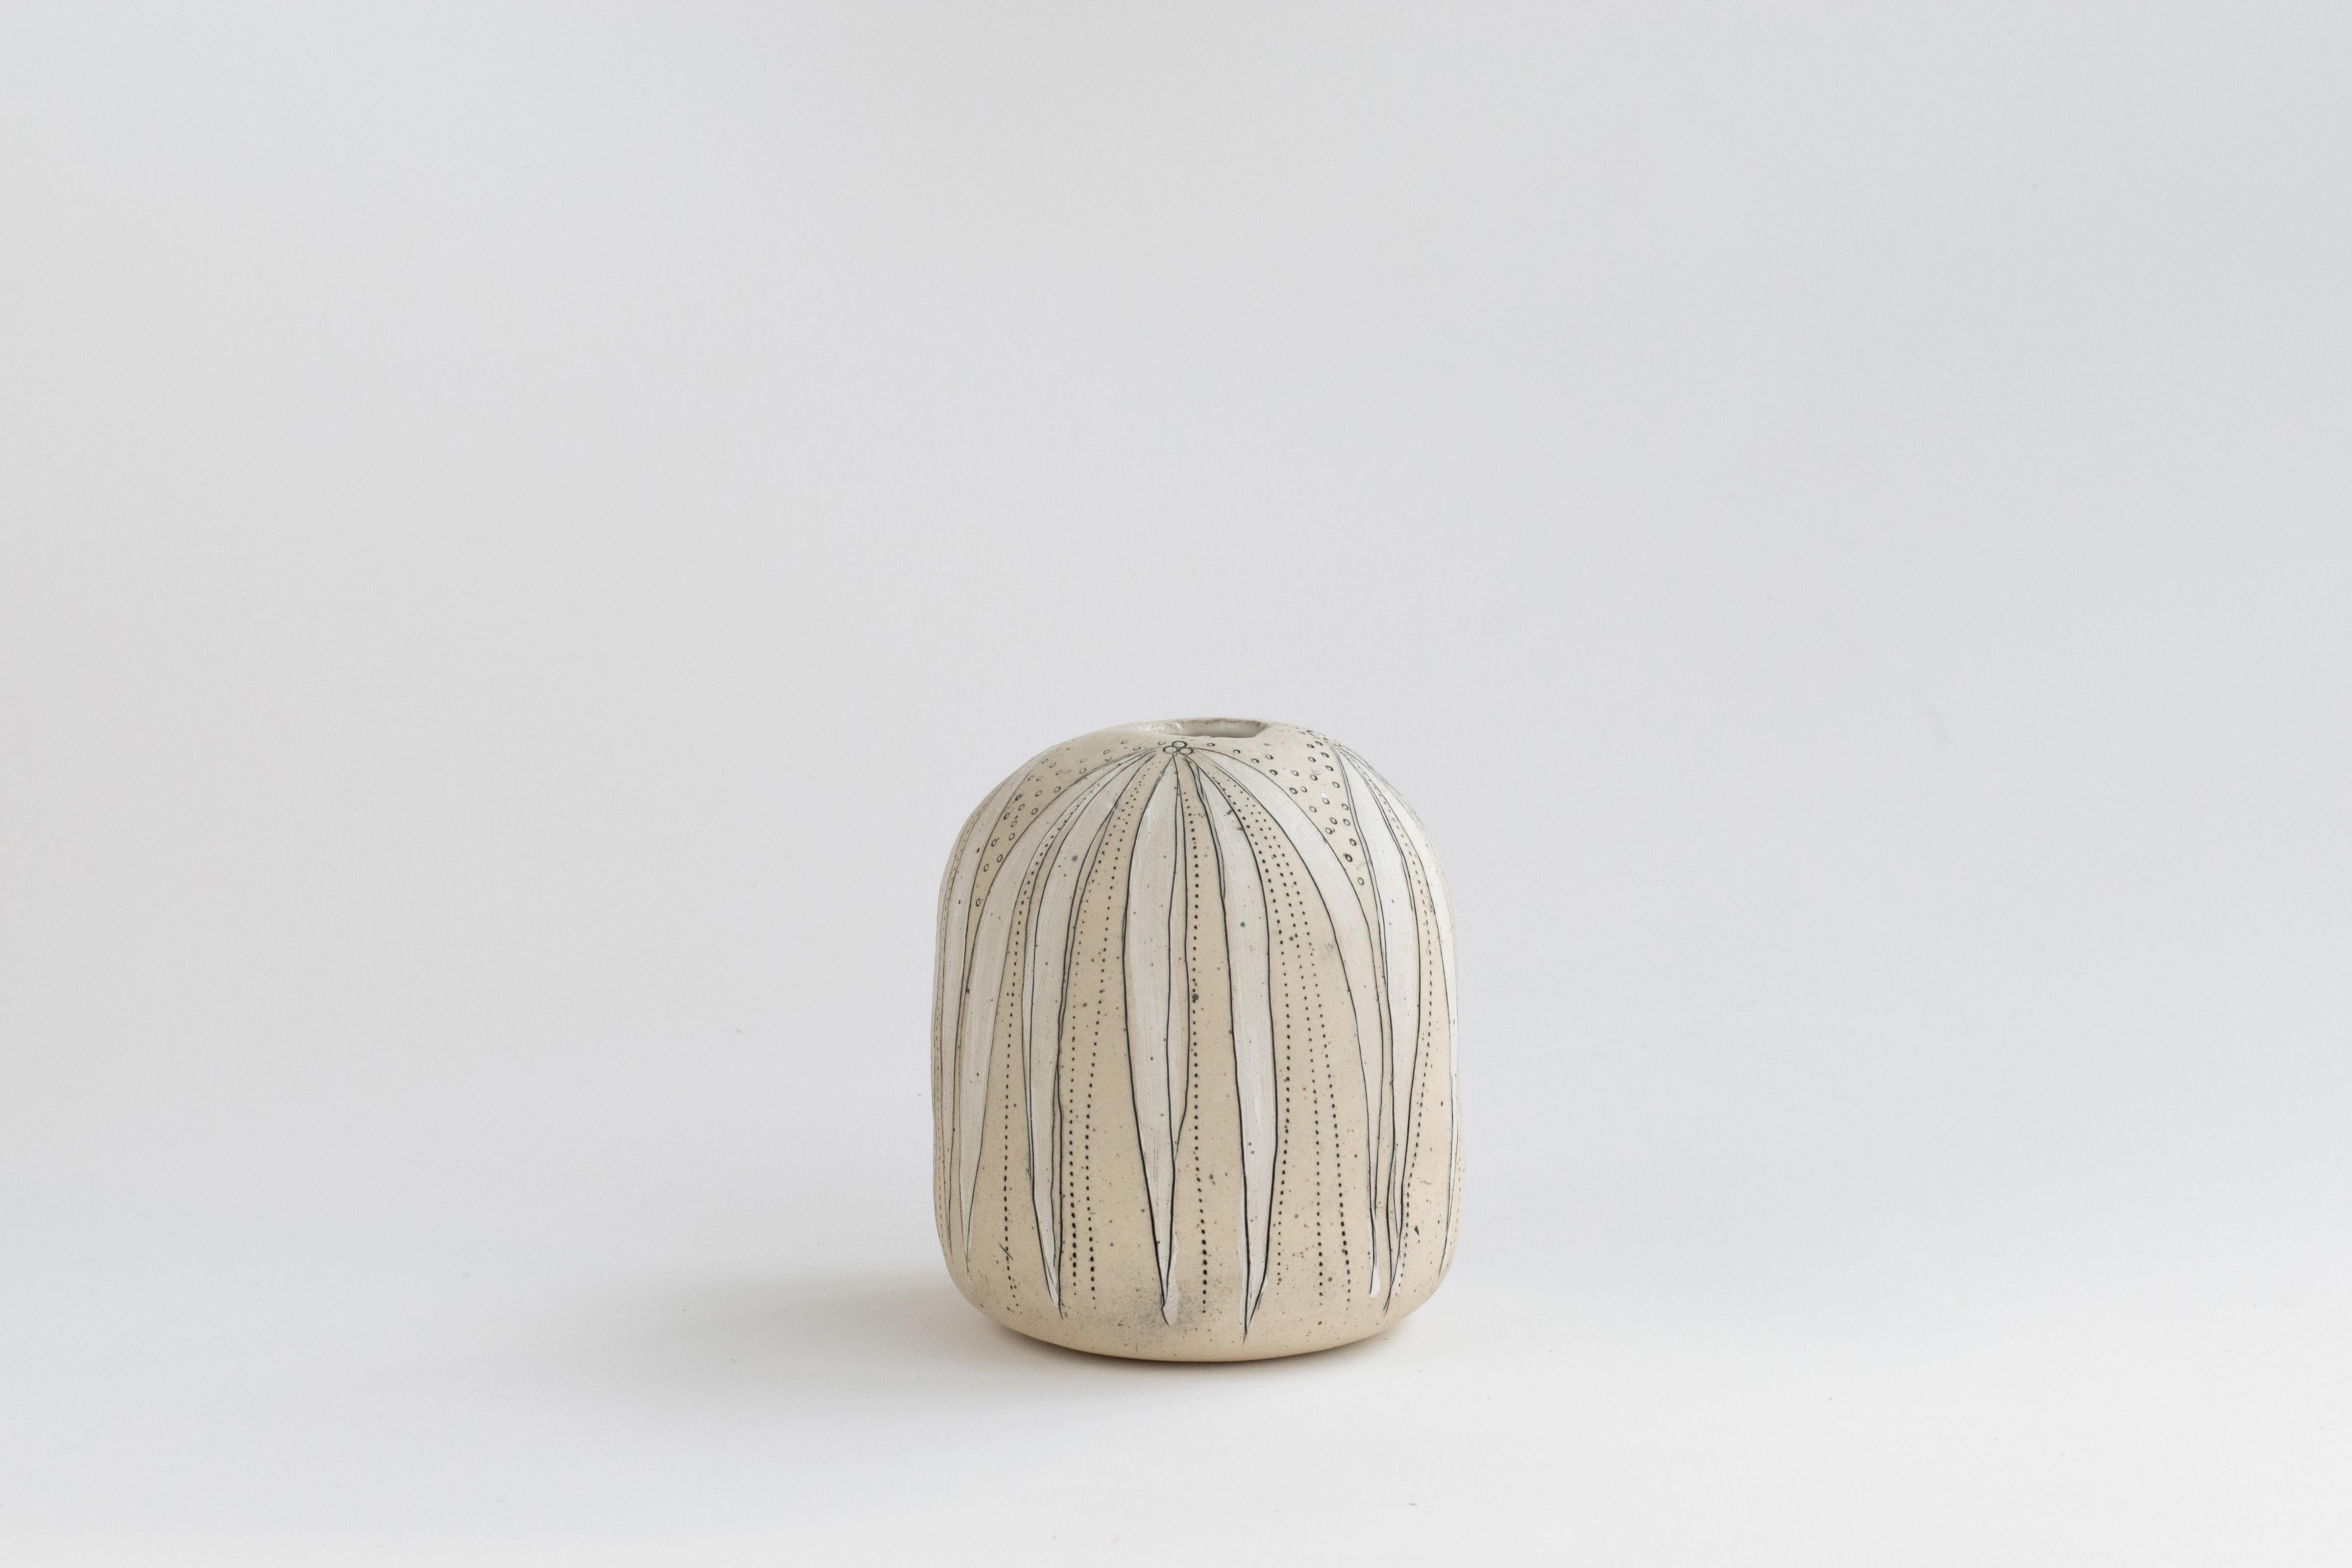 475-G handcrafted stoneware budding vase by Helen Prior


A delicate handcrafted Vase, organic in shape with a torn clay opening in natural speckled stoneware clay.
Part of the Cross Pollination Series- the stylizing and abstraction of elements